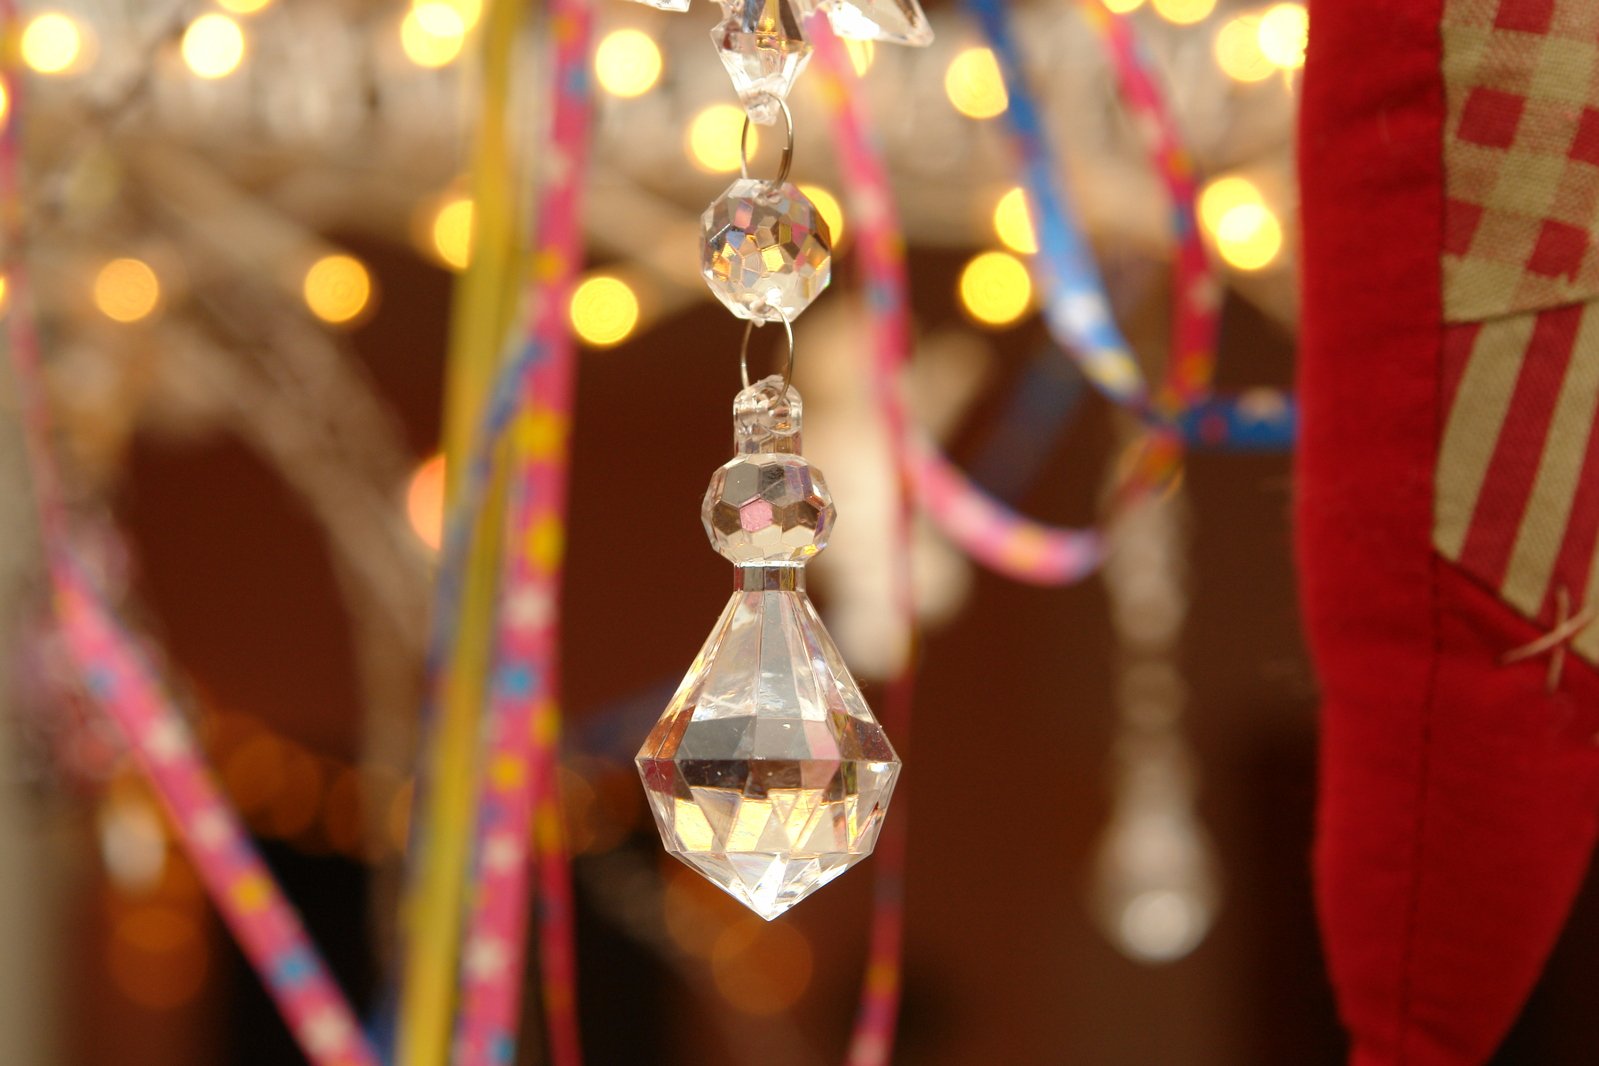 some crystal hanging ornaments and lights in the background